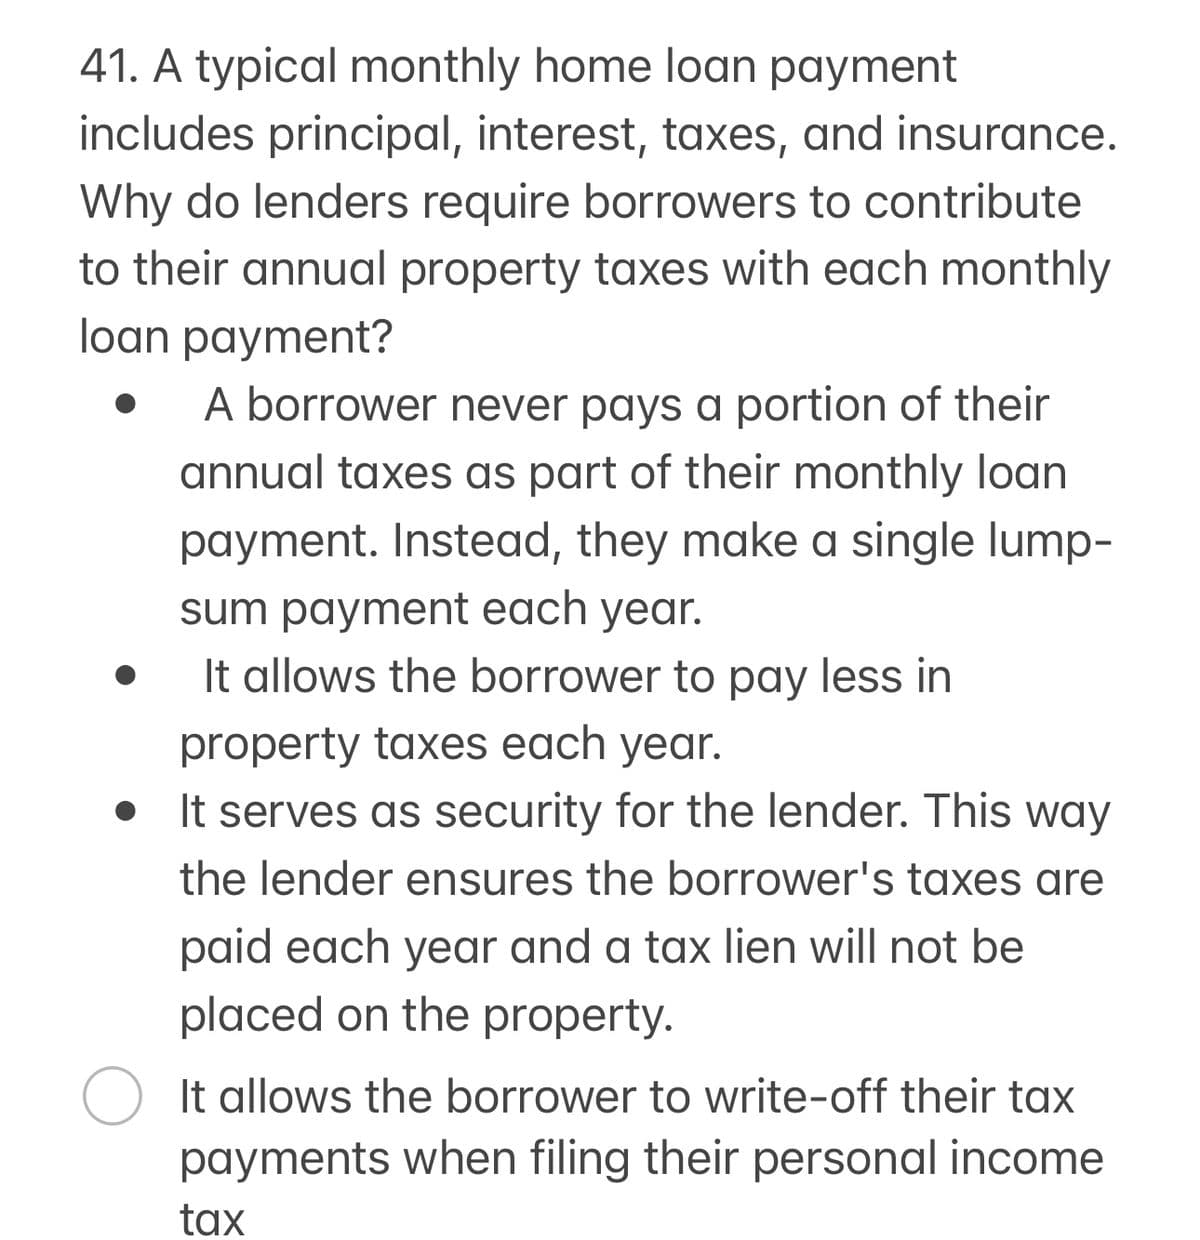 41. A typical monthly home loan payment
includes principal, interest, taxes, and insurance.
Why do lenders require borrowers to contribute
to their annual property taxes with each monthly
loan payment?
A borrower never pays a portion of their
annual taxes as part of their monthly loan
payment. Instead, they make a single lump-
sum payment each year.
It allows the borrower to pay less in
property taxes each year.
It serves as security for the lender. This way
the lender ensures the borrower's taxes are
paid each year and a tax lien will not be
placed on the property.
It allows the borrower to write-off their tax
payments when filing their personal income
tax